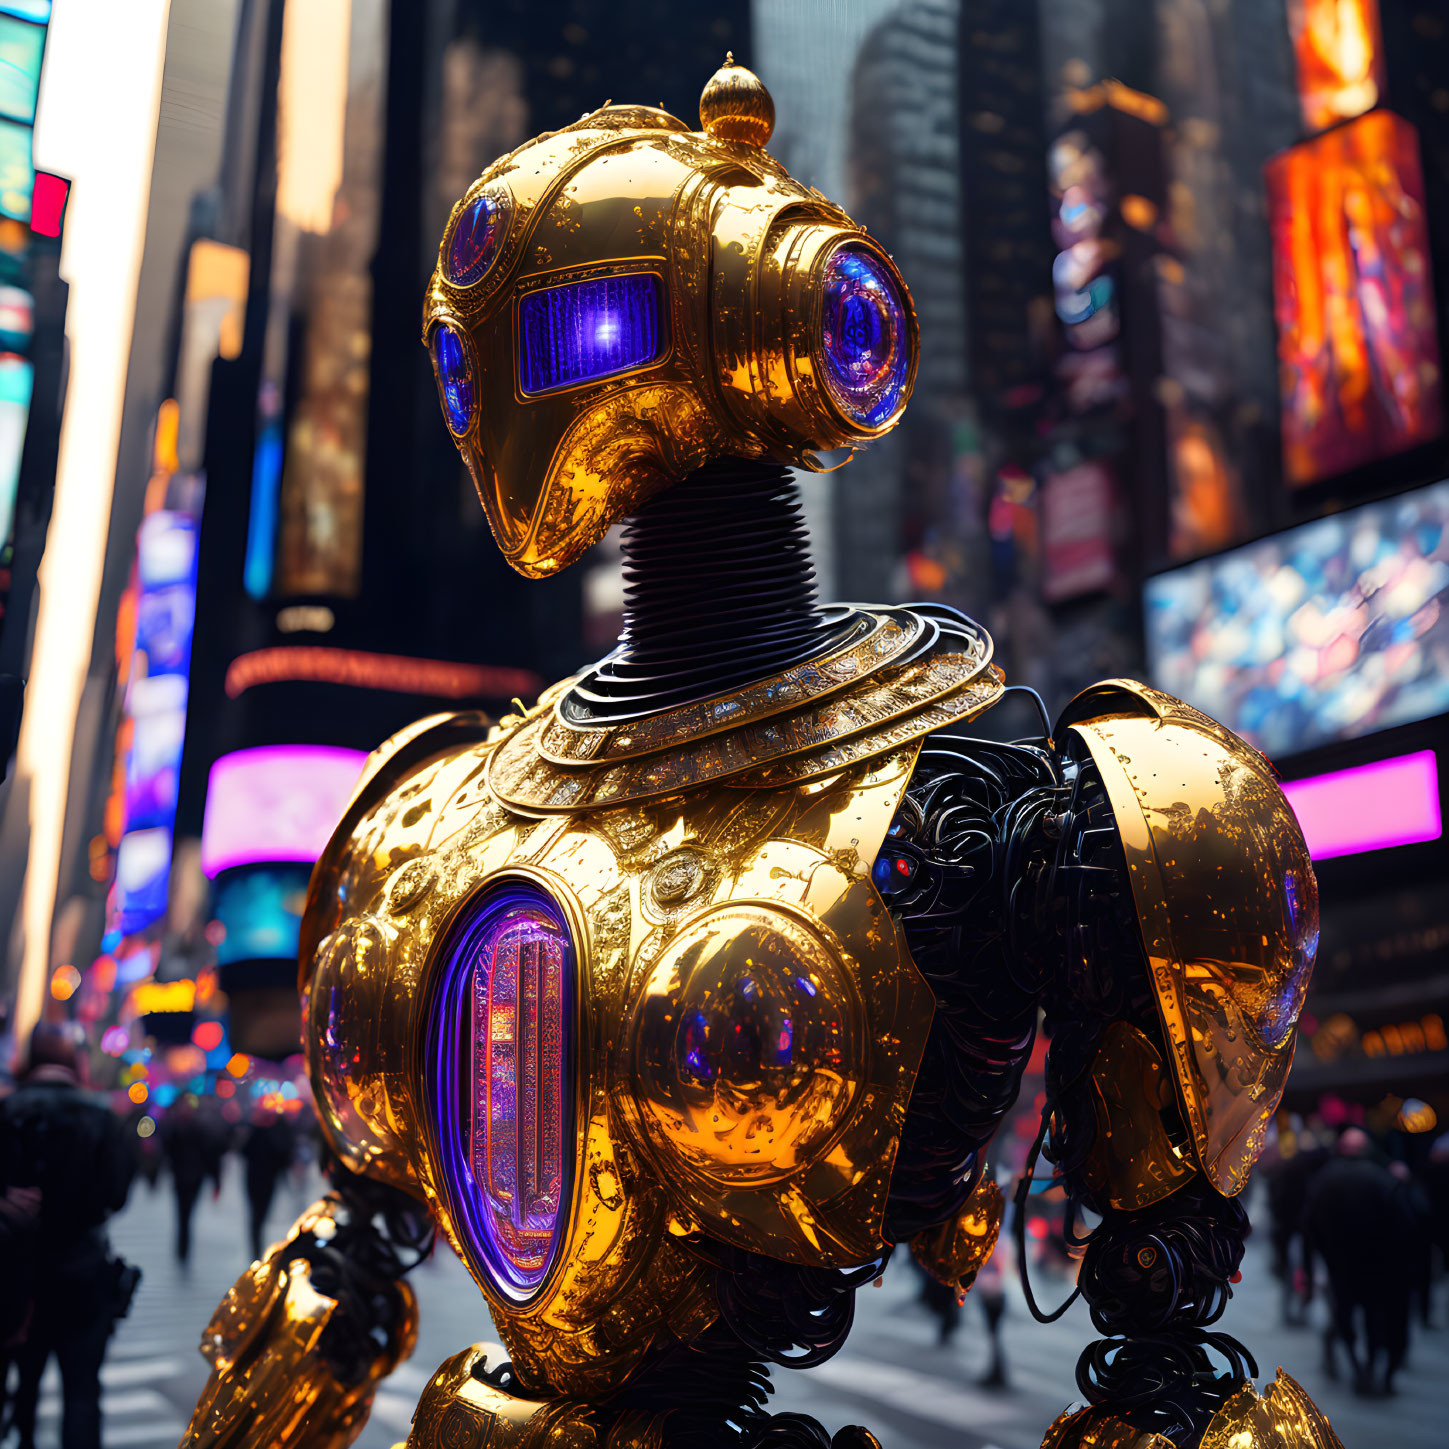 Golden Robot with Blue-Lit Eyes in Busy Cityscape